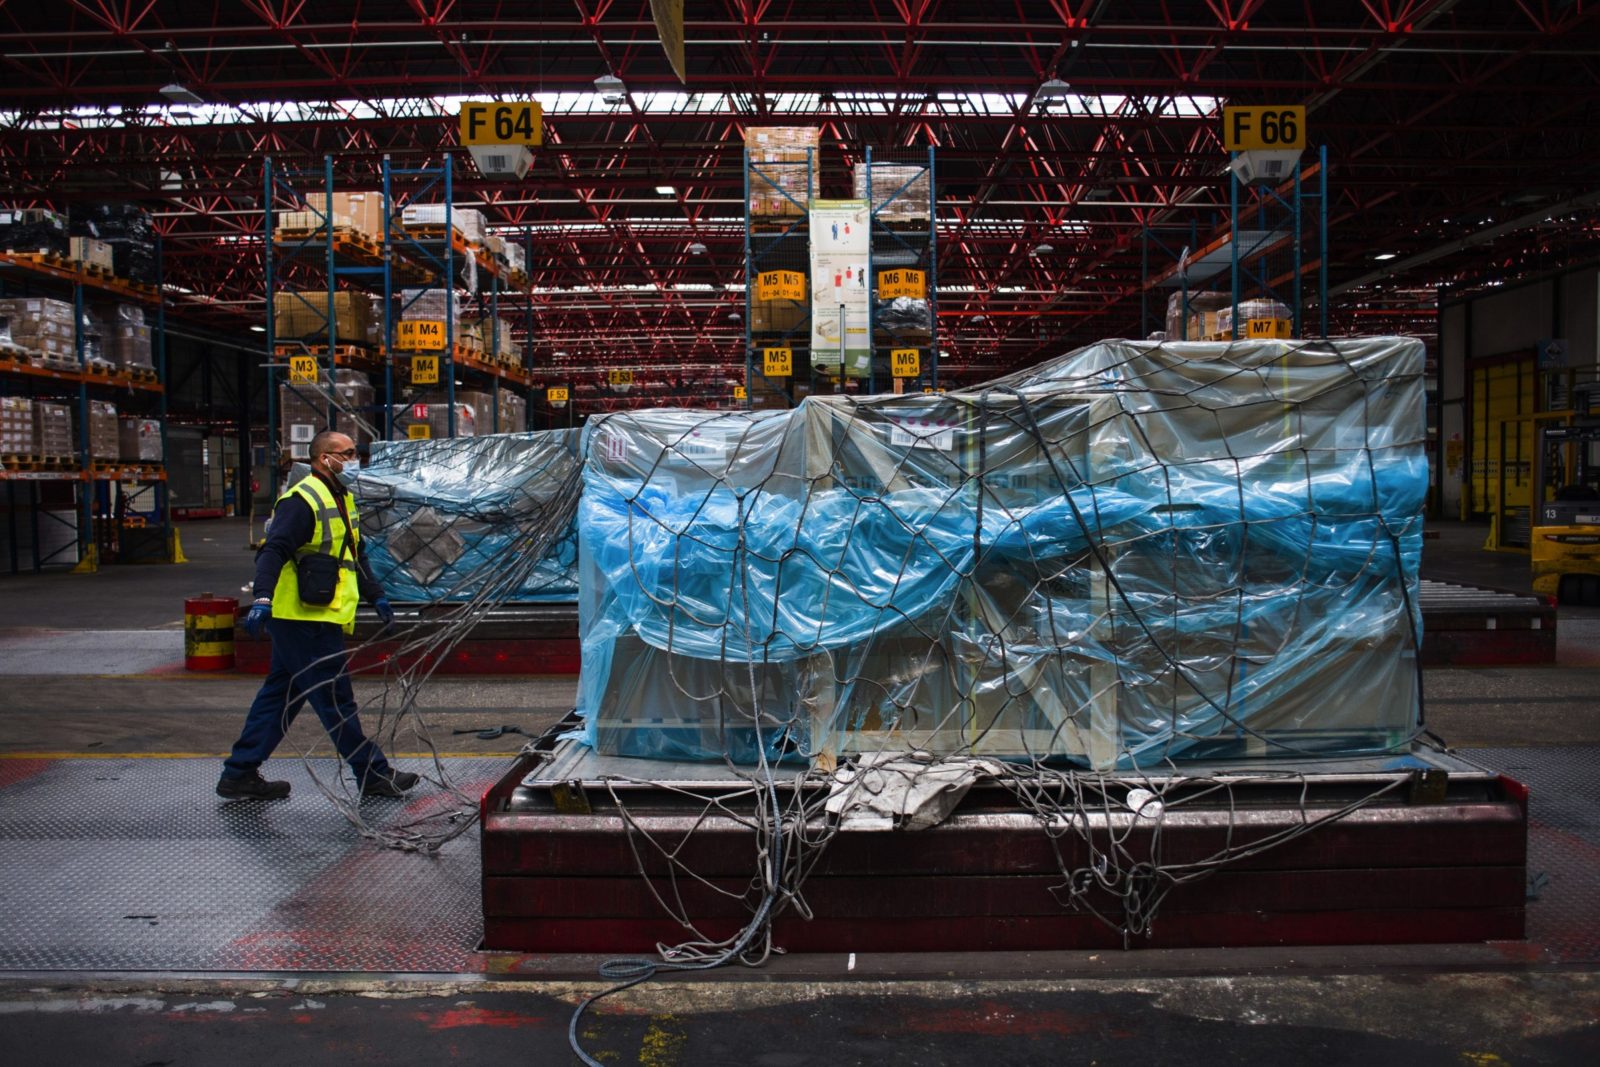 A worker passes wrapped cargo in the Air France-KLM G1XL cargo hangar at Charles de Gaulle airport in Roissy, France, on Monday, May 10, 2021. (Bloomberg&mdash;© 2021 Bloomberg Finance LP)